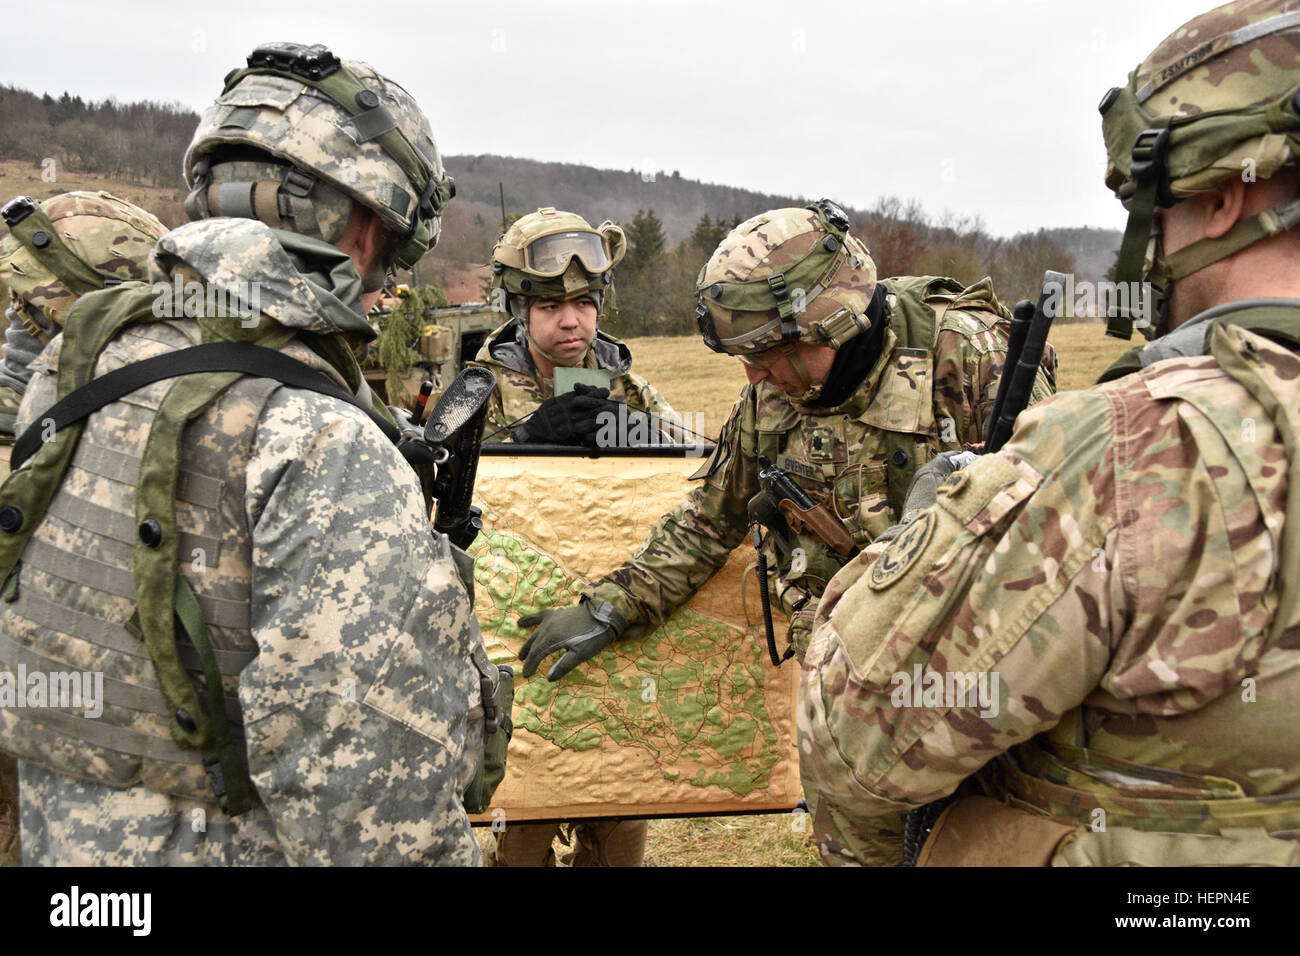 Lt. Col. Steven E. Gventer (middle), the Squadron Commander for 2nd Squadron (Cougars), 2nd Cavalry Regiment, points out the unit's position on a terrain map during a Combined Arms Rehearsal while participating in Exercise Allied Spirit IV, being held at the Joint Multinational Readiness Center located in Hohenfels, Germany, Jan. 28, 2016. The goal of the exercise is to prepare forces, in Europe, to operate together by exercising tactical interoperability and testing secure communications within NATO Alliance members and partner nations. (U.S. Army photo by Sgt. William A. Tanner) Allied Spiri Stock Photo